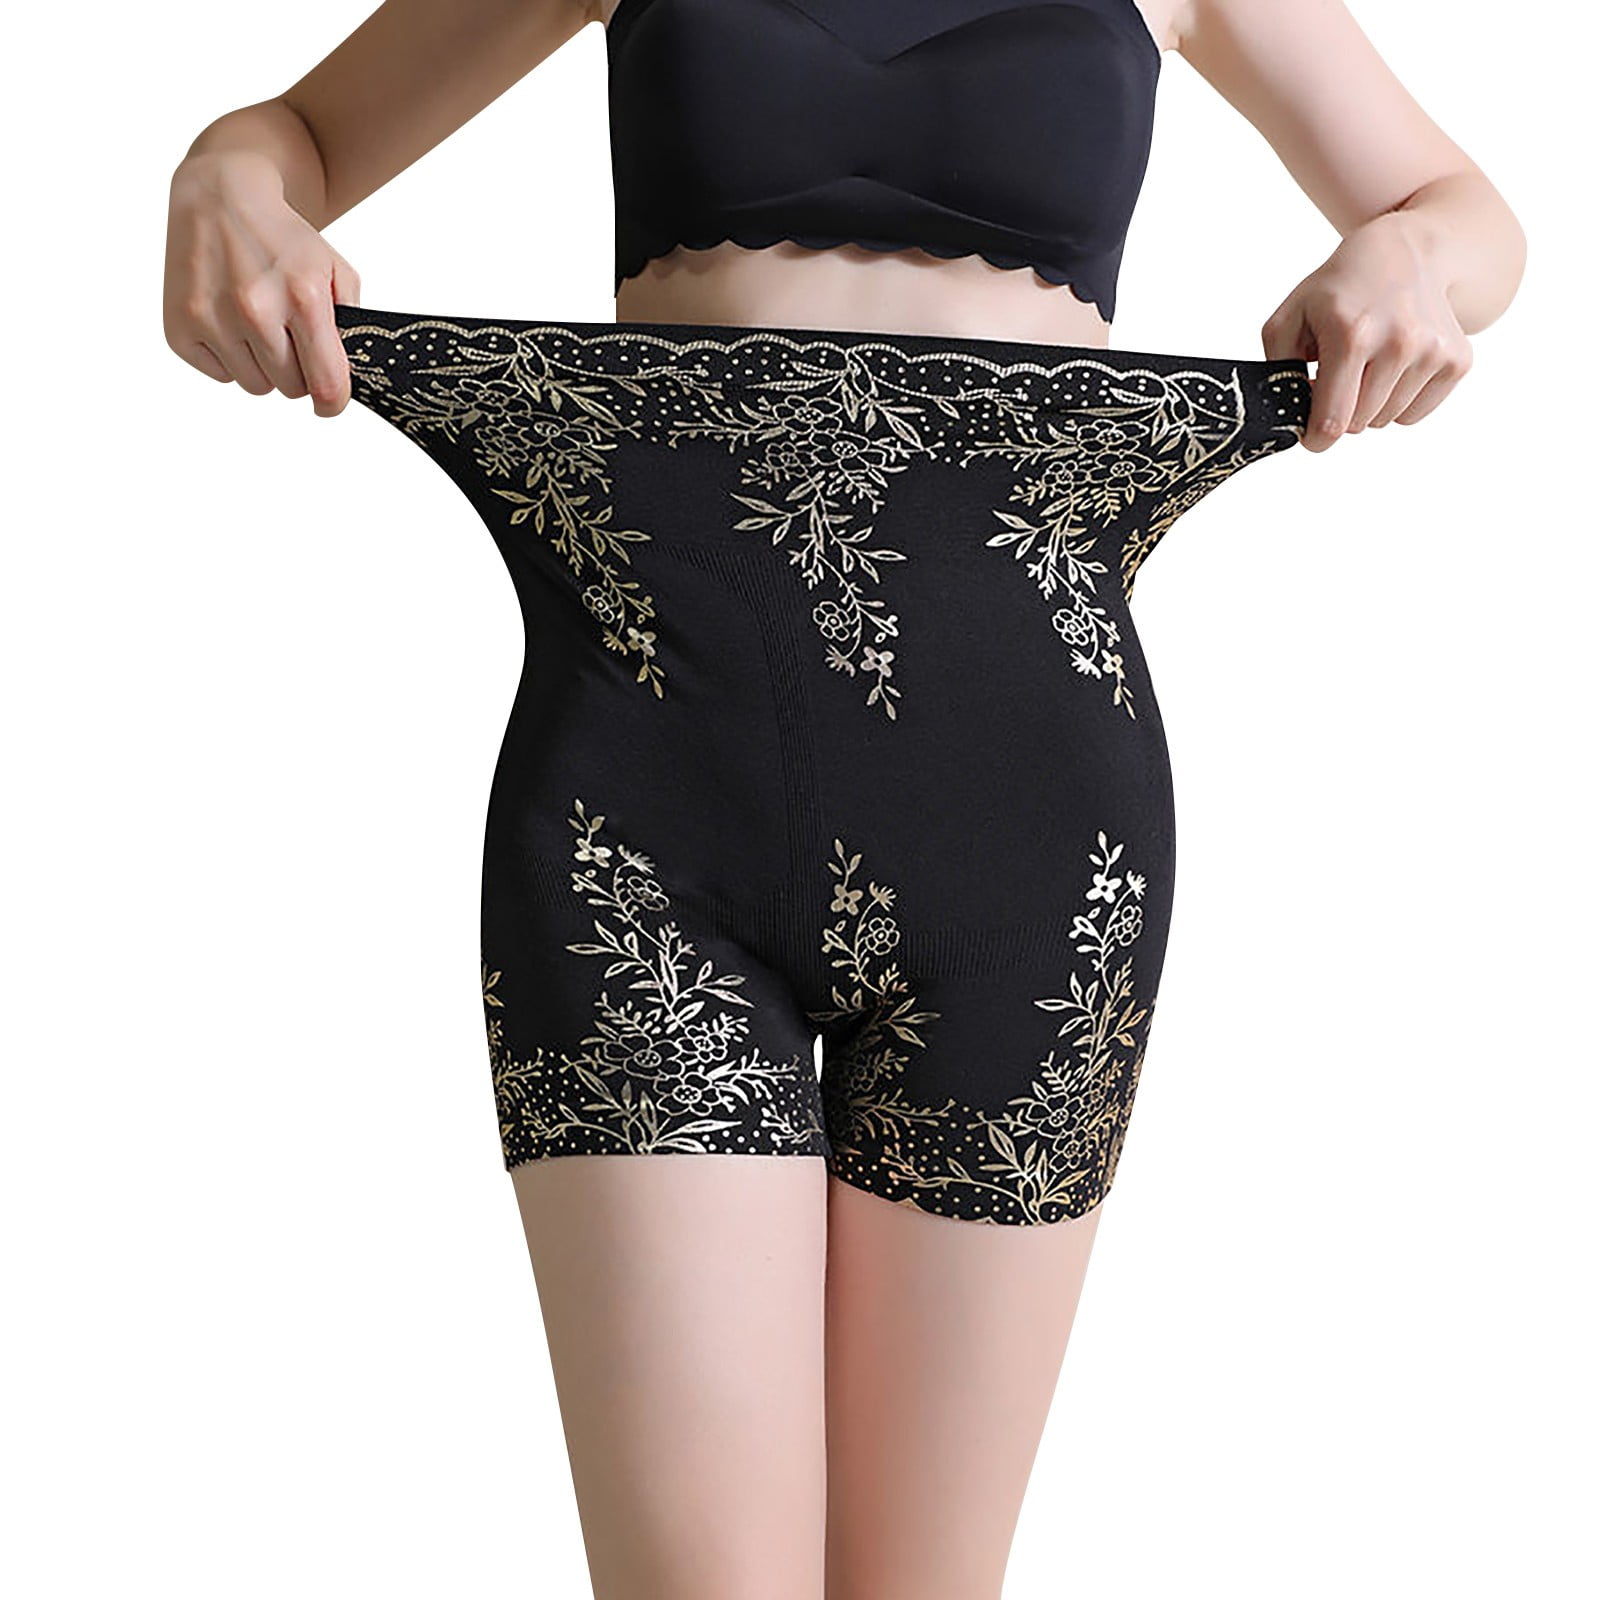 Women's Hot Stamping Pants Large Size High Waist Lifting Pants Ladies Boxer  Underwear Pants Size One Size